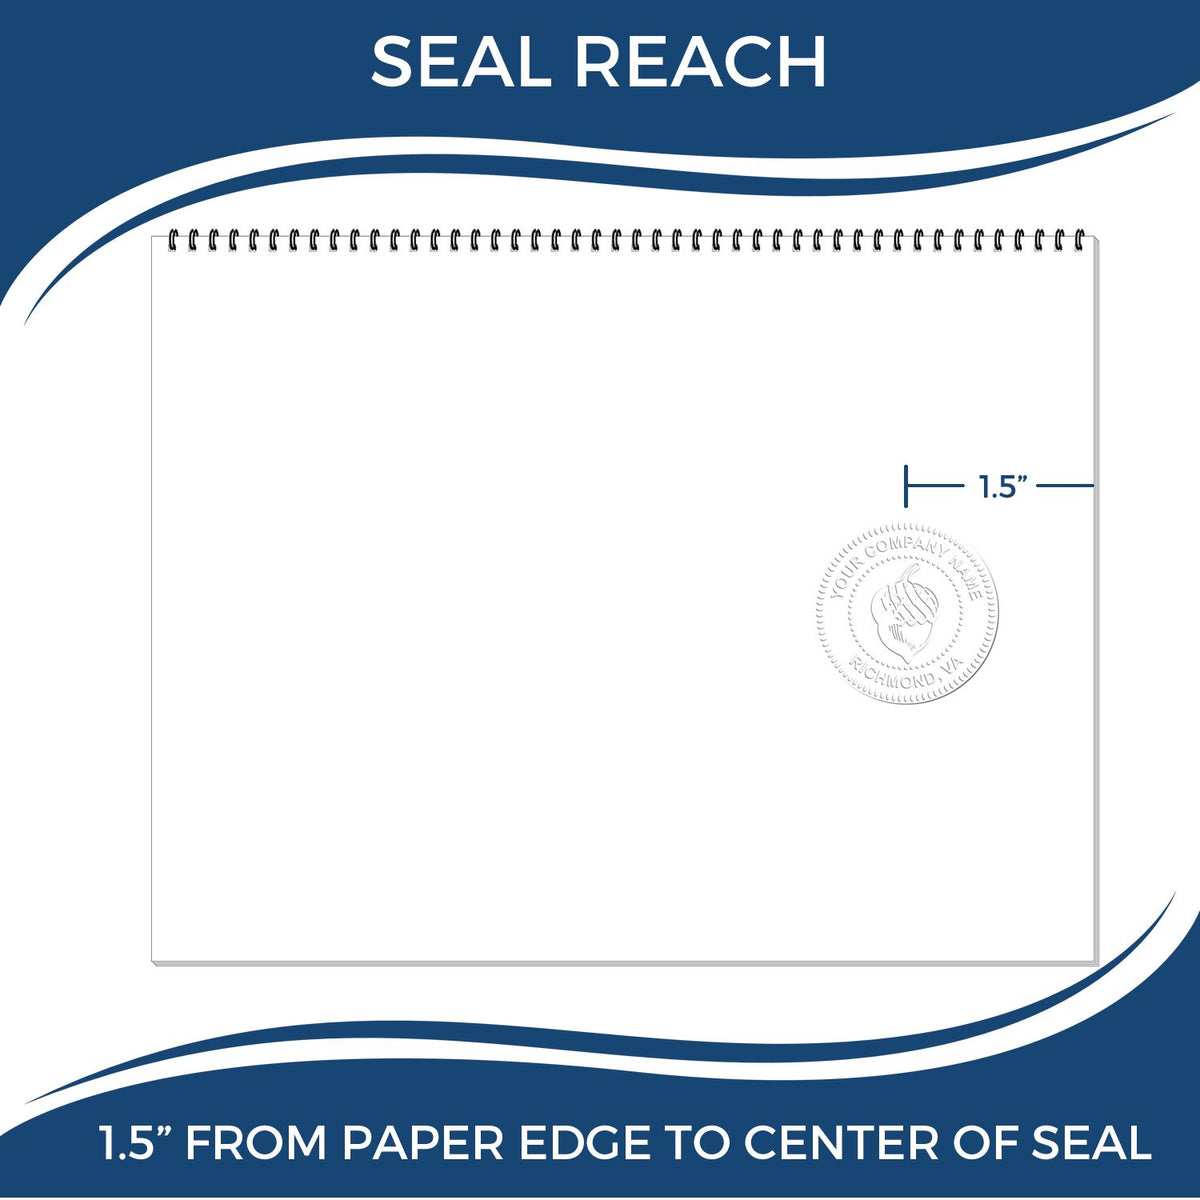 An infographic showing the seal reach which is represented by a ruler and a miniature seal image of the Gift Idaho Architect Seal